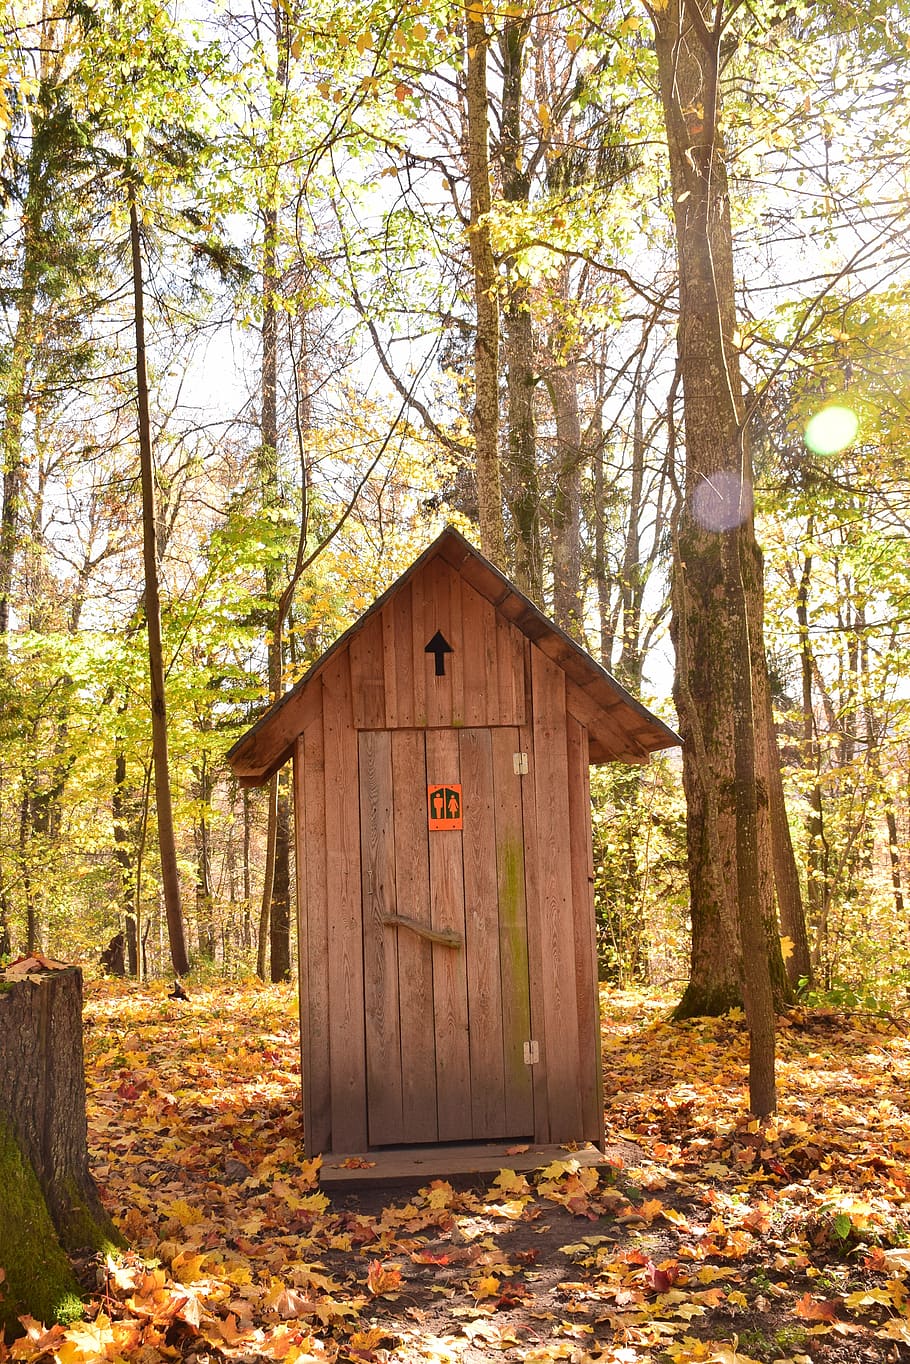 bathroom, toilet, wc, restroom, outdoor, forest, autumn, fall, public, tree